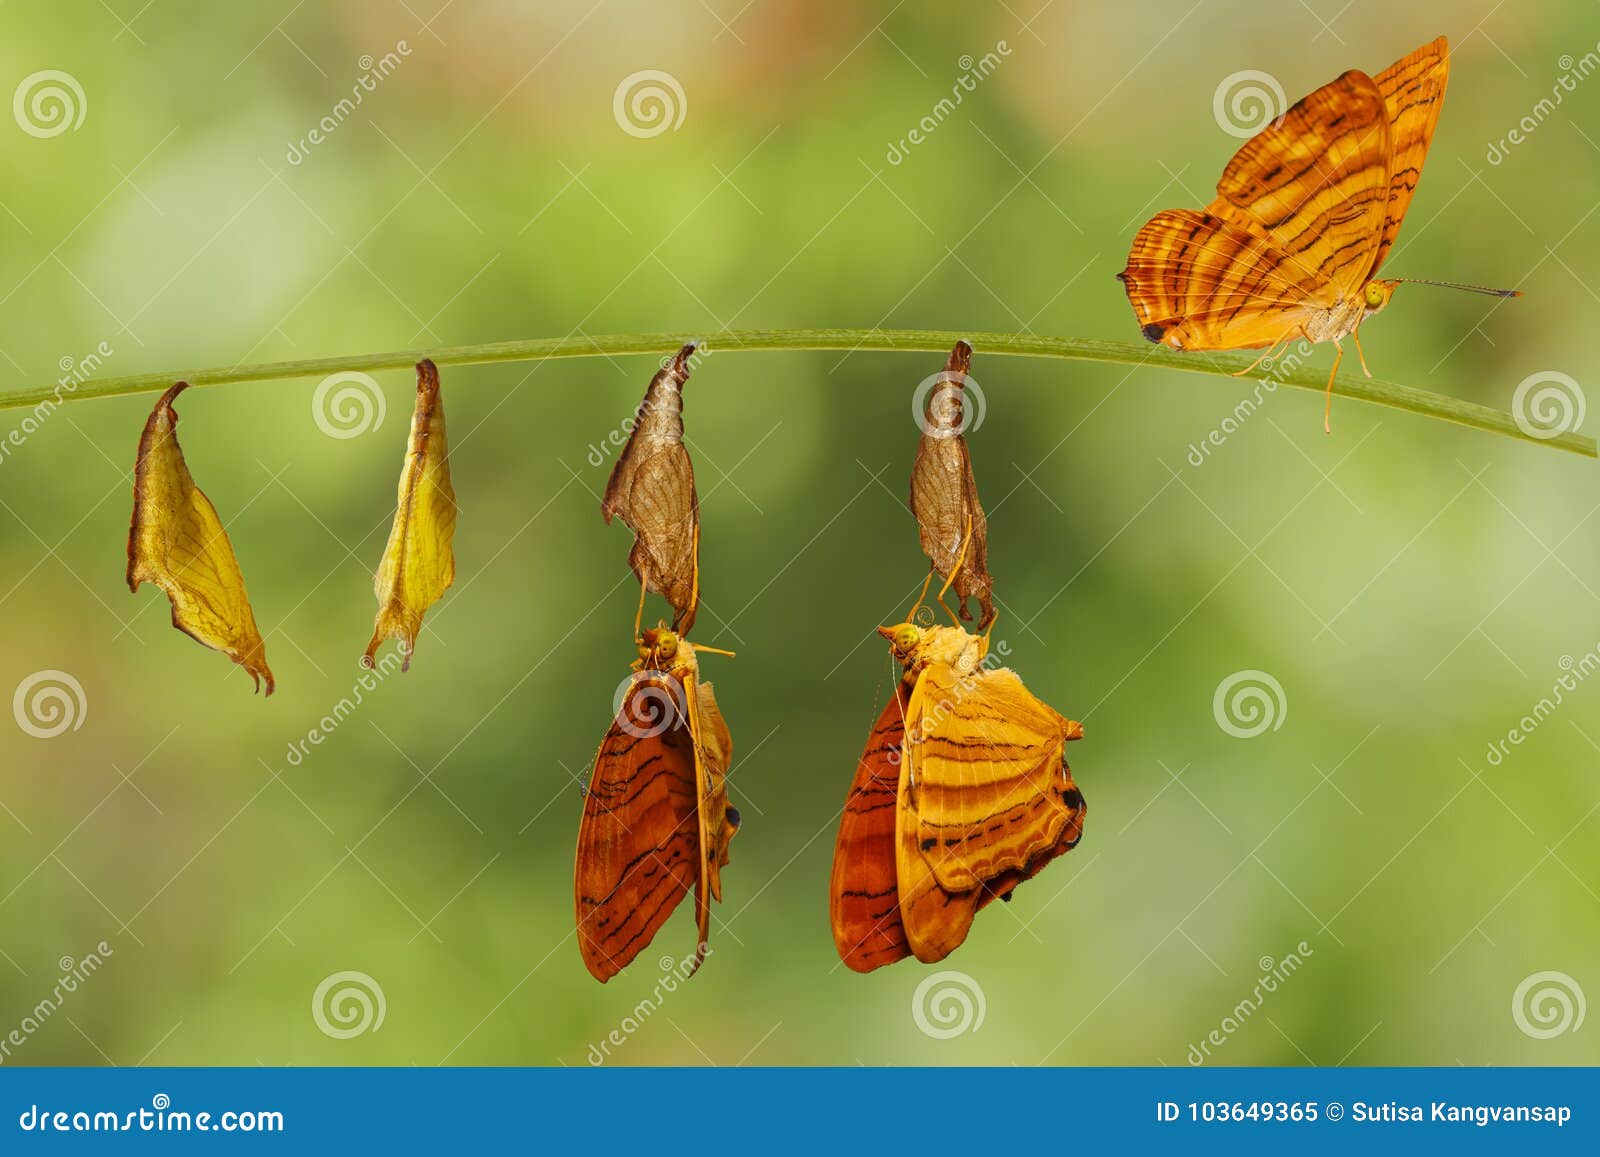 life cycle of common maplet chersonesia risa butterfly hangin